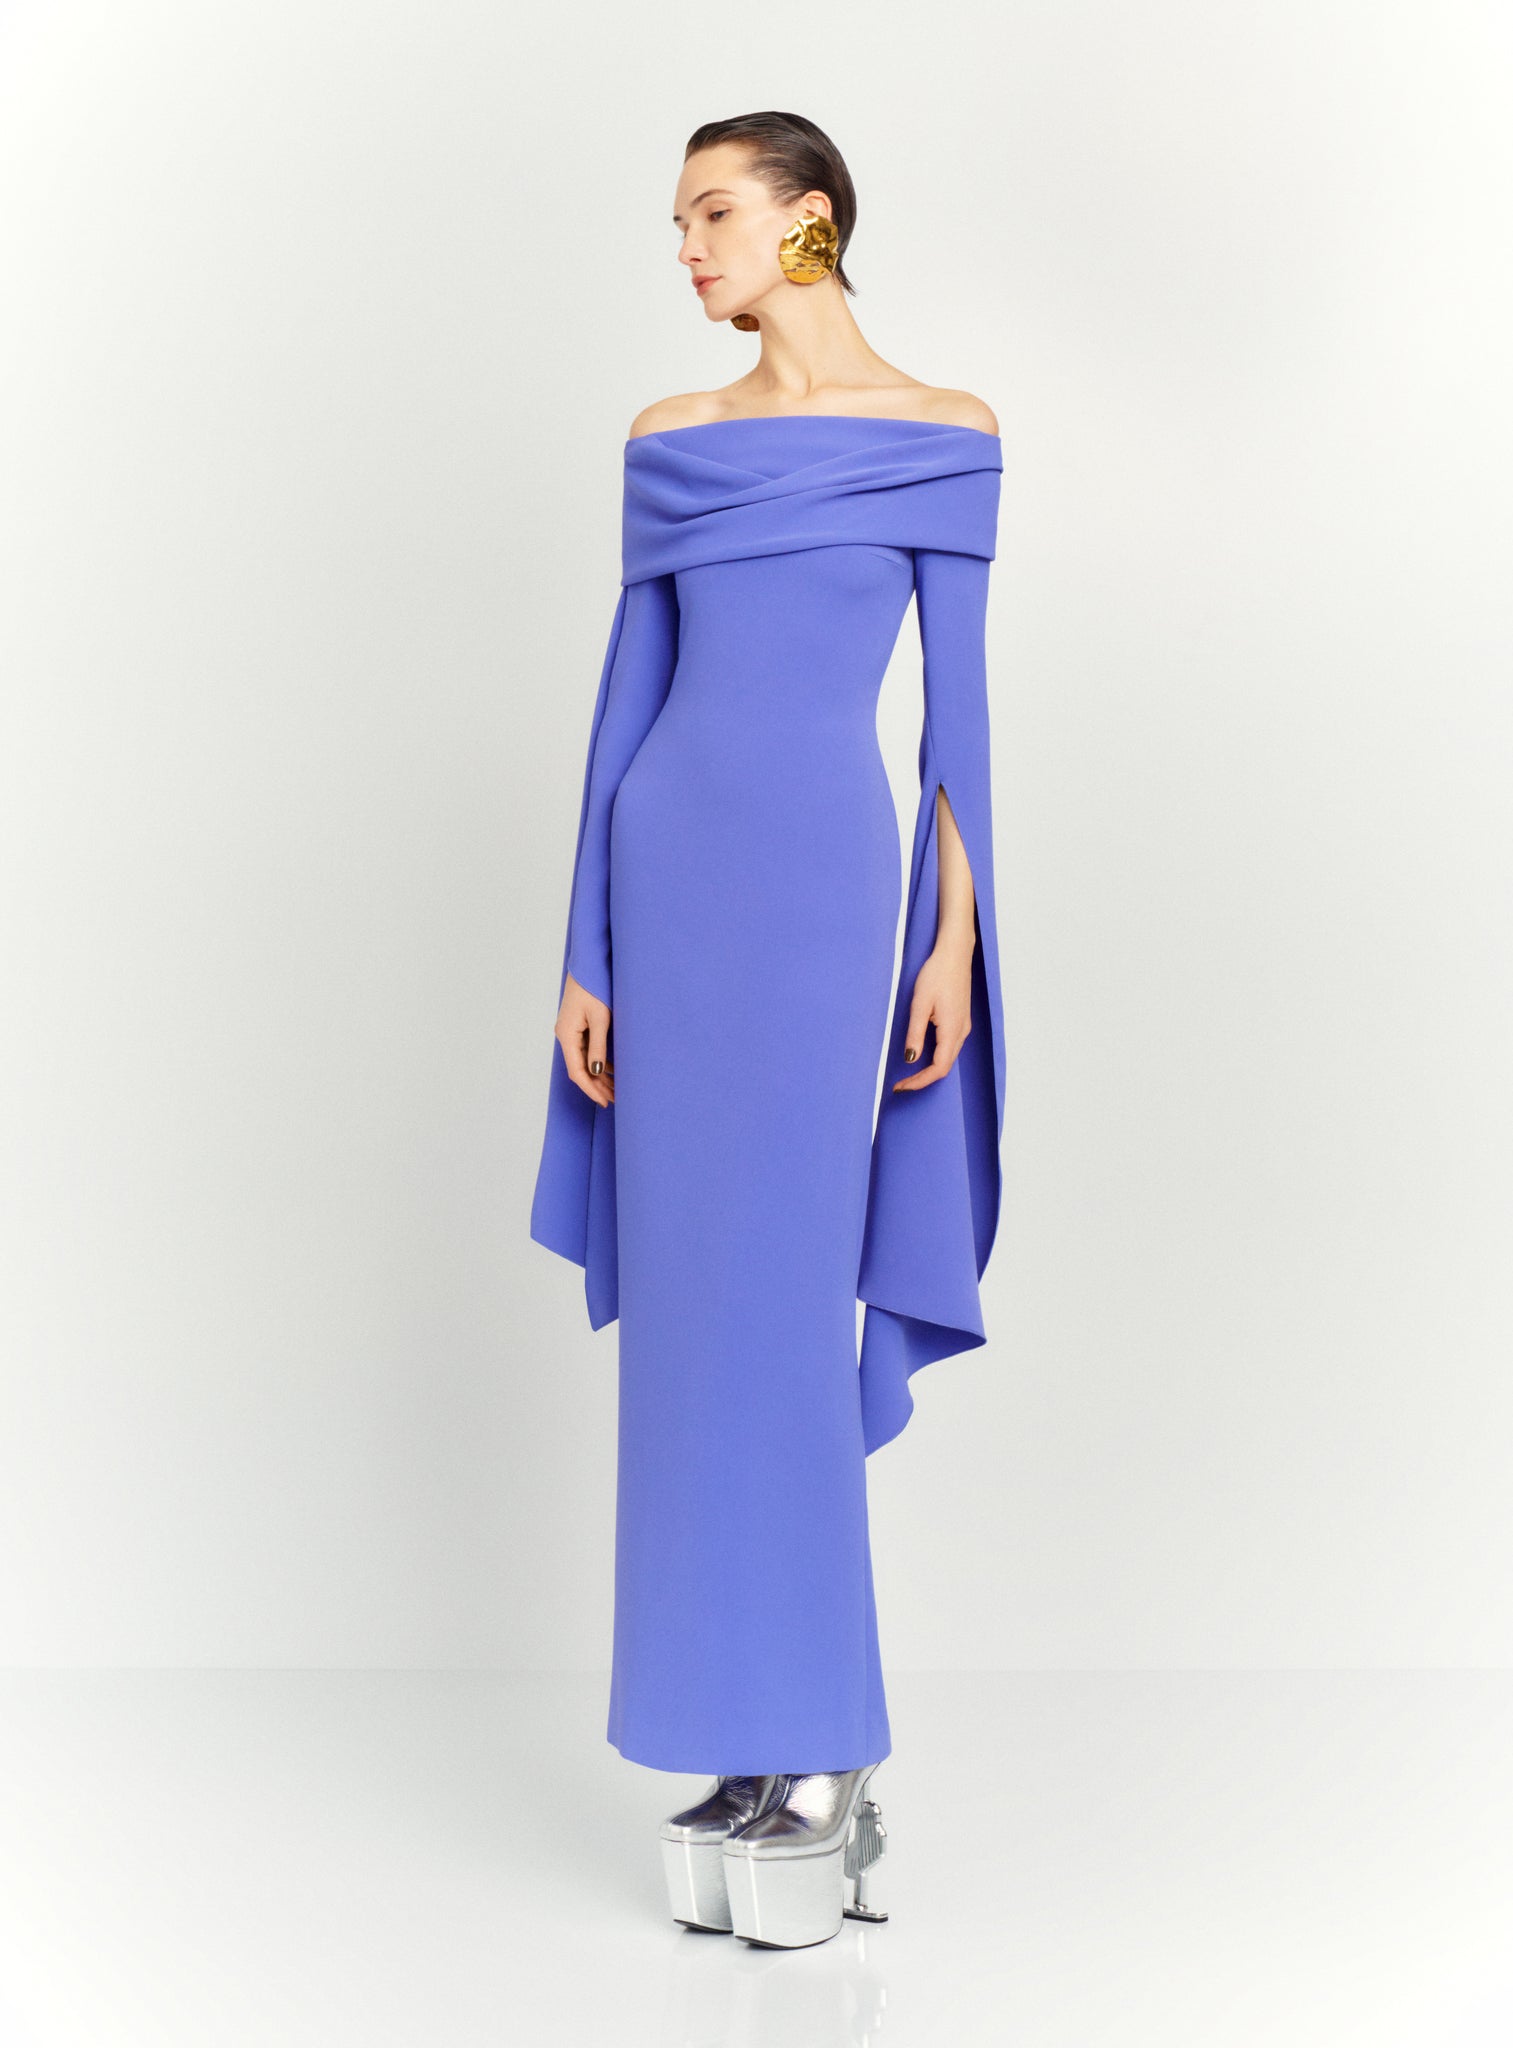 The Arden Maxi Dress in Periwinkle